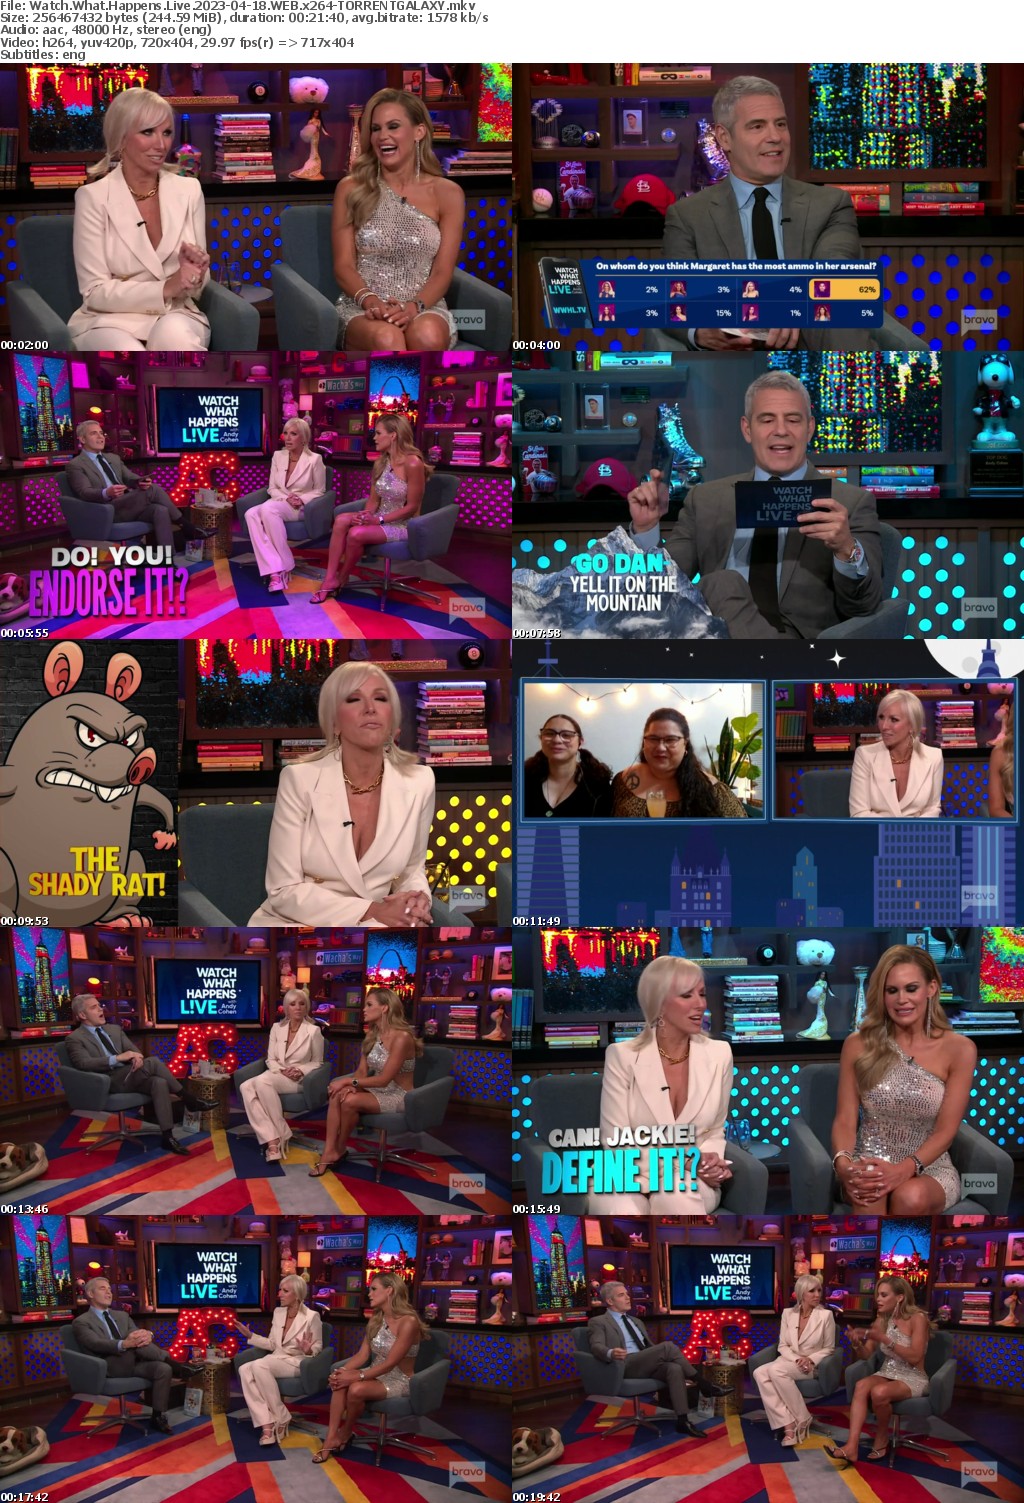 Watch What Happens Live 2023-04-18 WEB x264-GALAXY